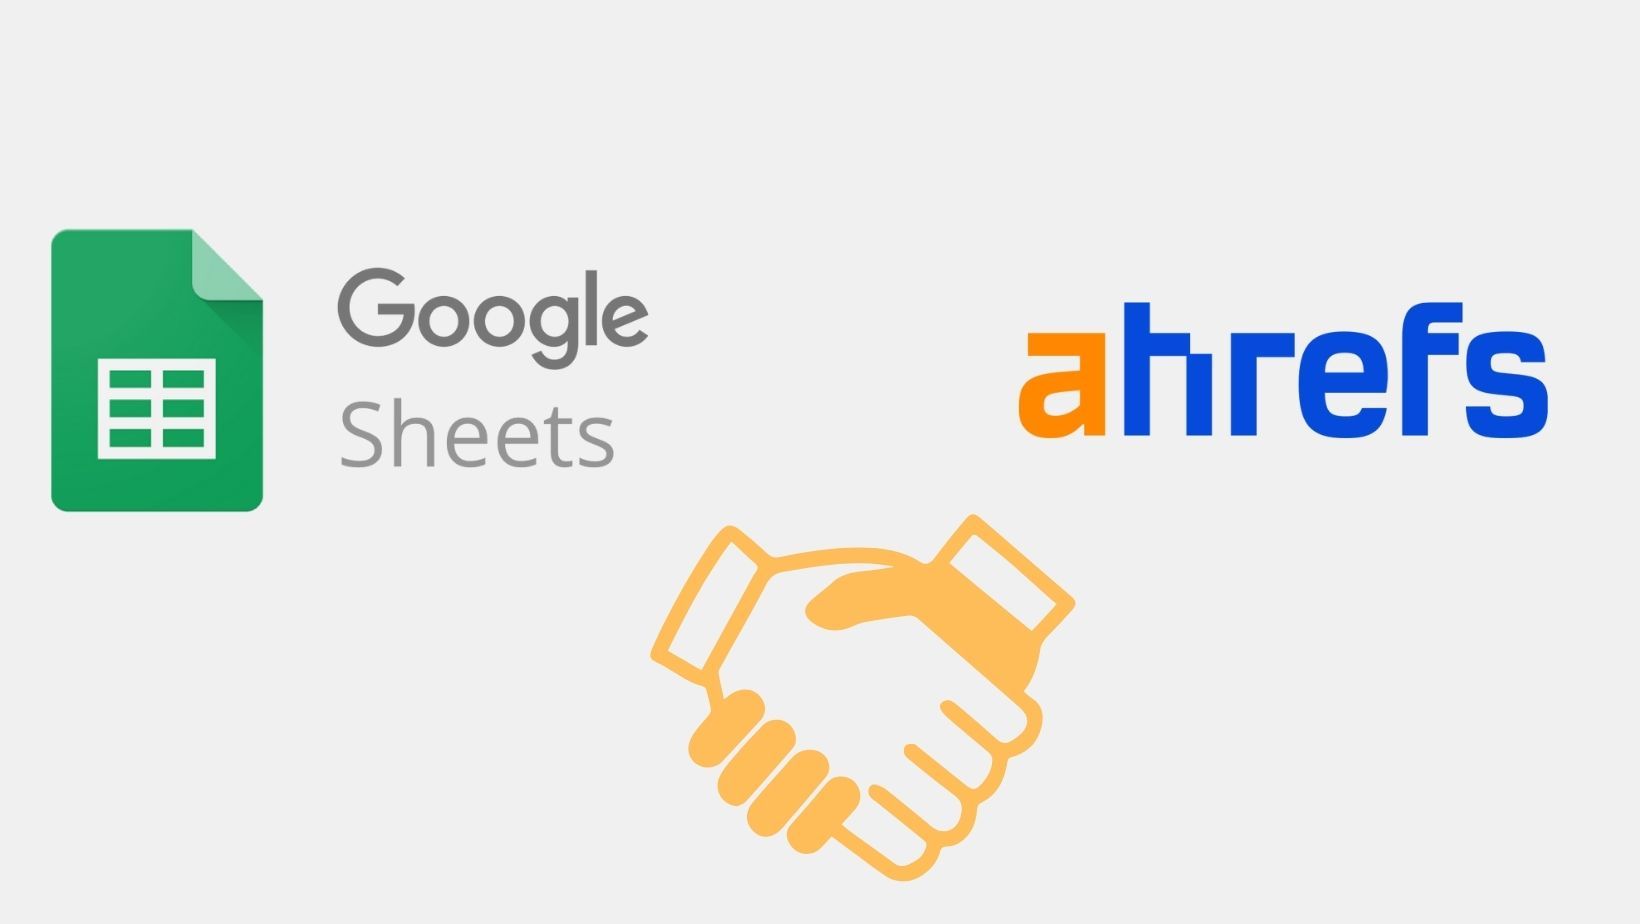 Google Sheets and Ahrefs logo side by side on gray background